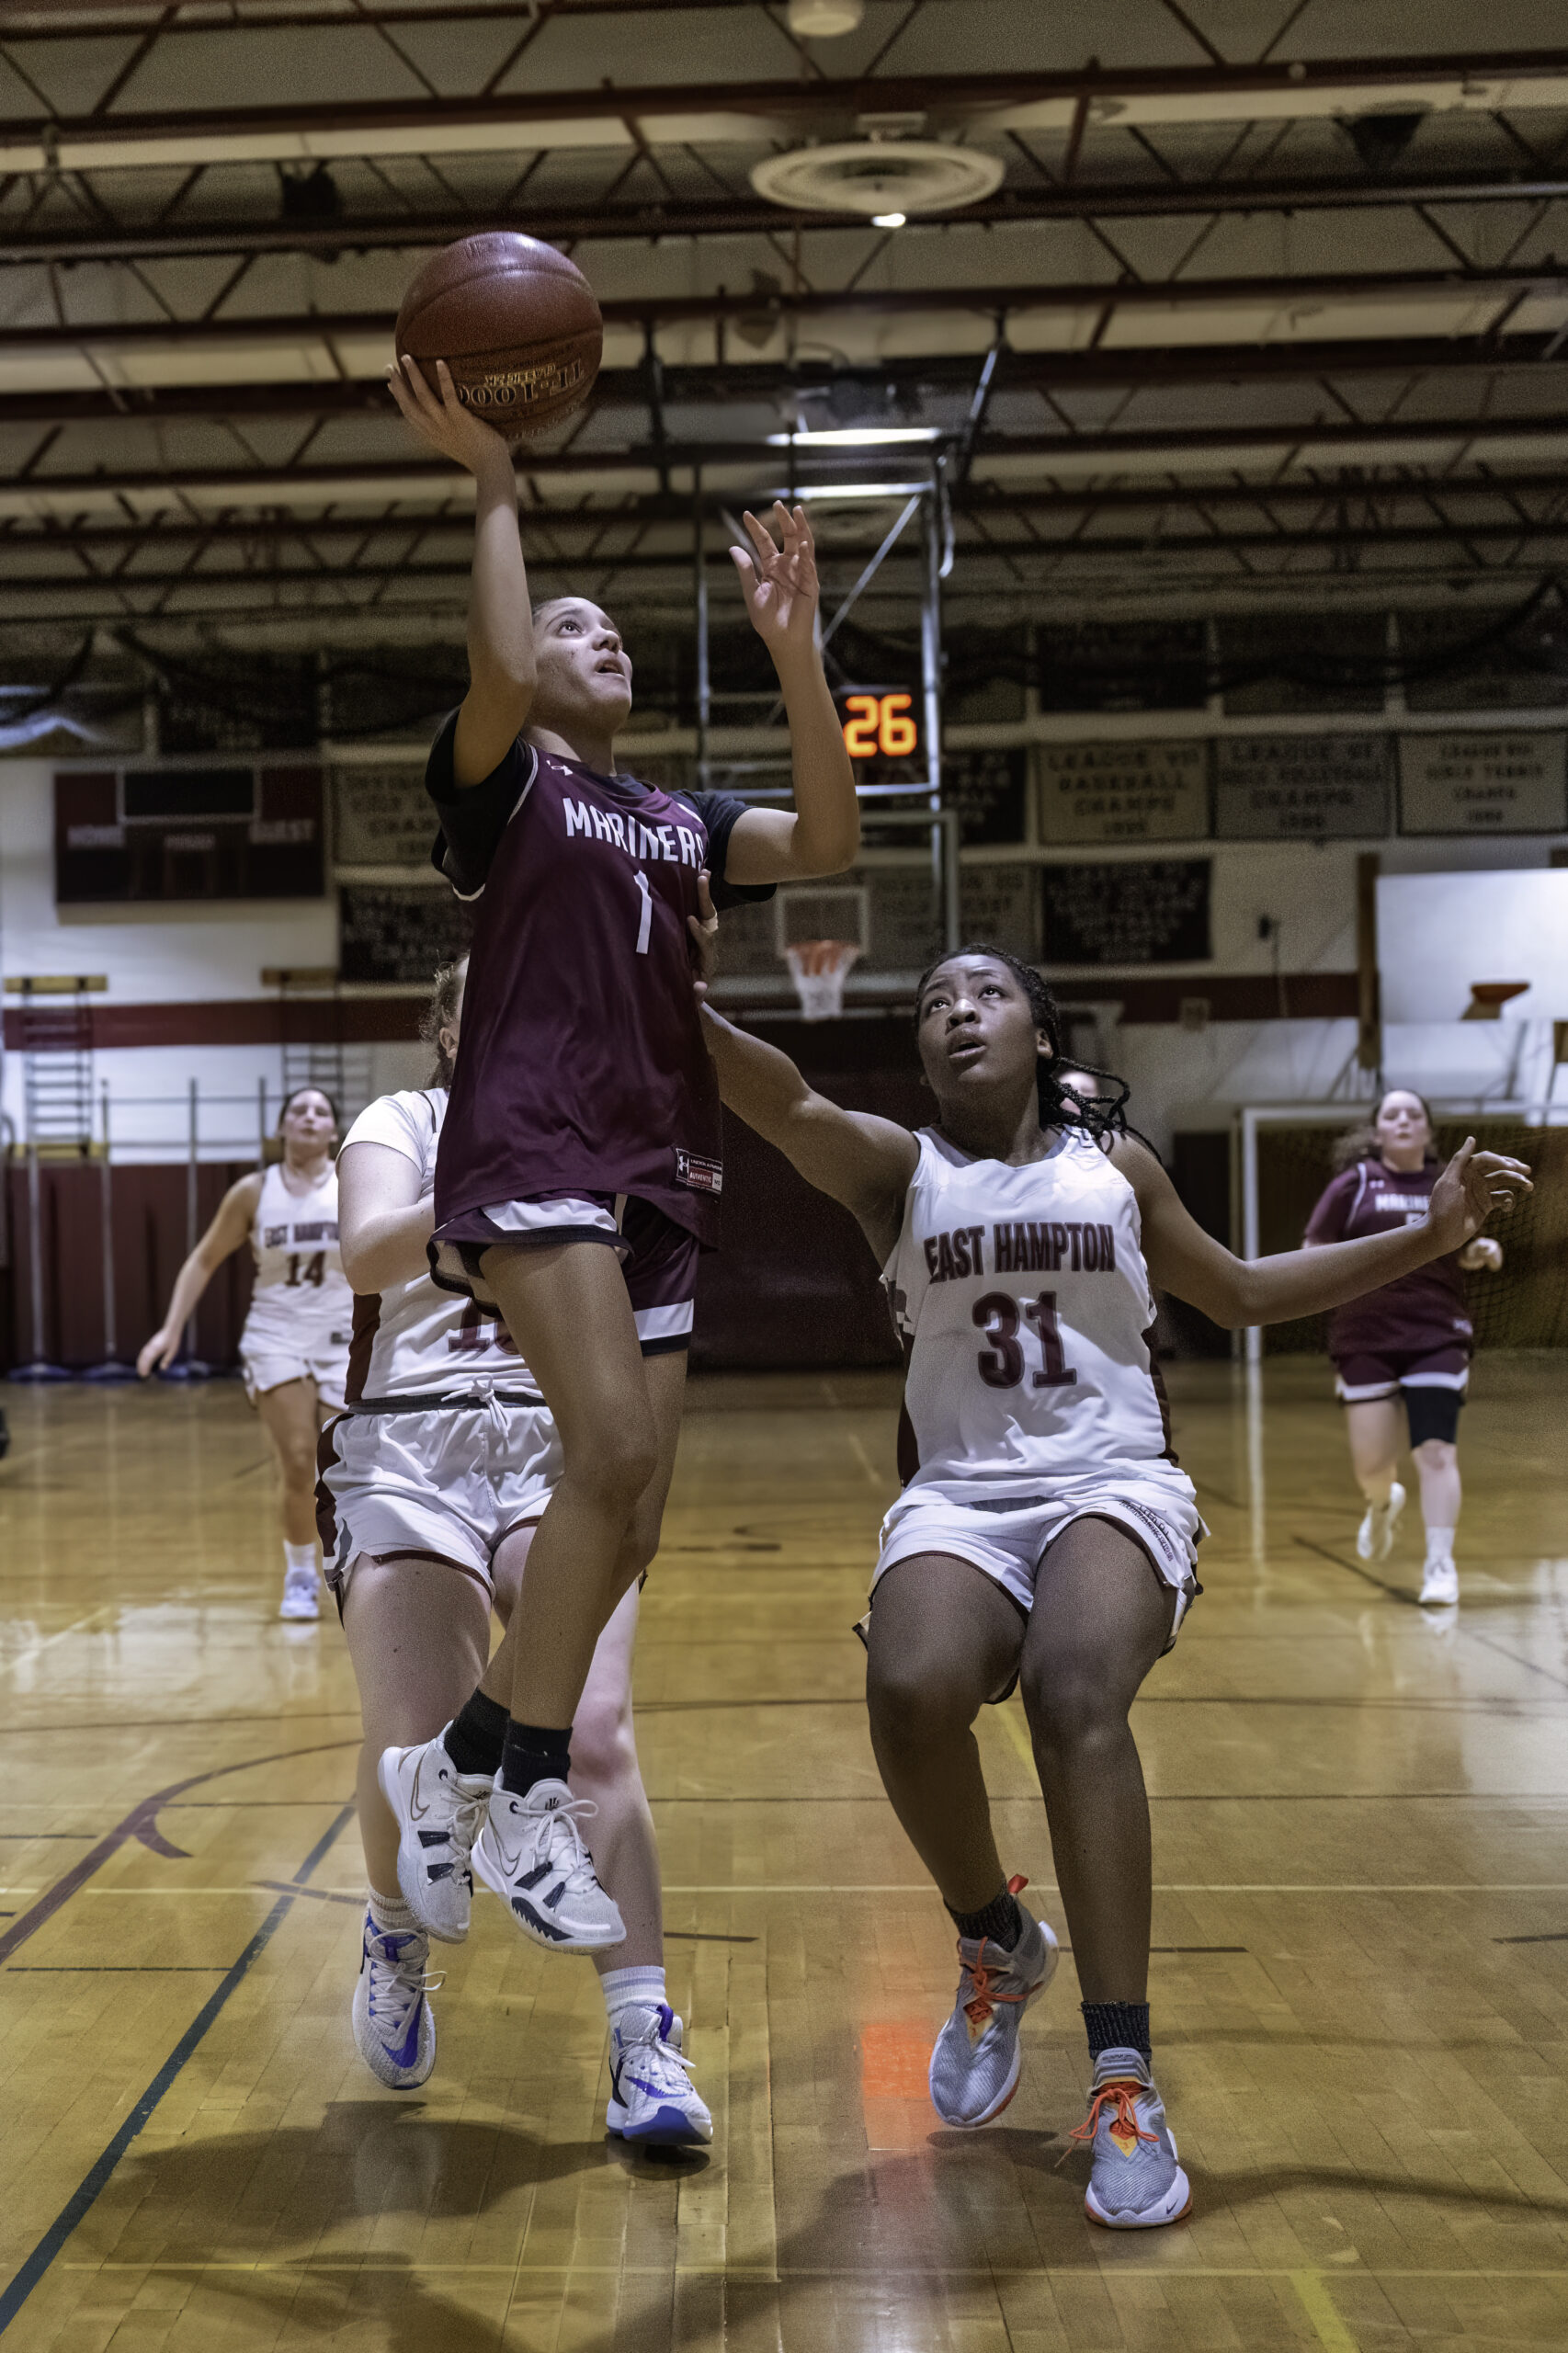 Southampton senior Daelyn Palmore scored a game-high 25 points in Monday night's victory.   MARIANNE BARNETT